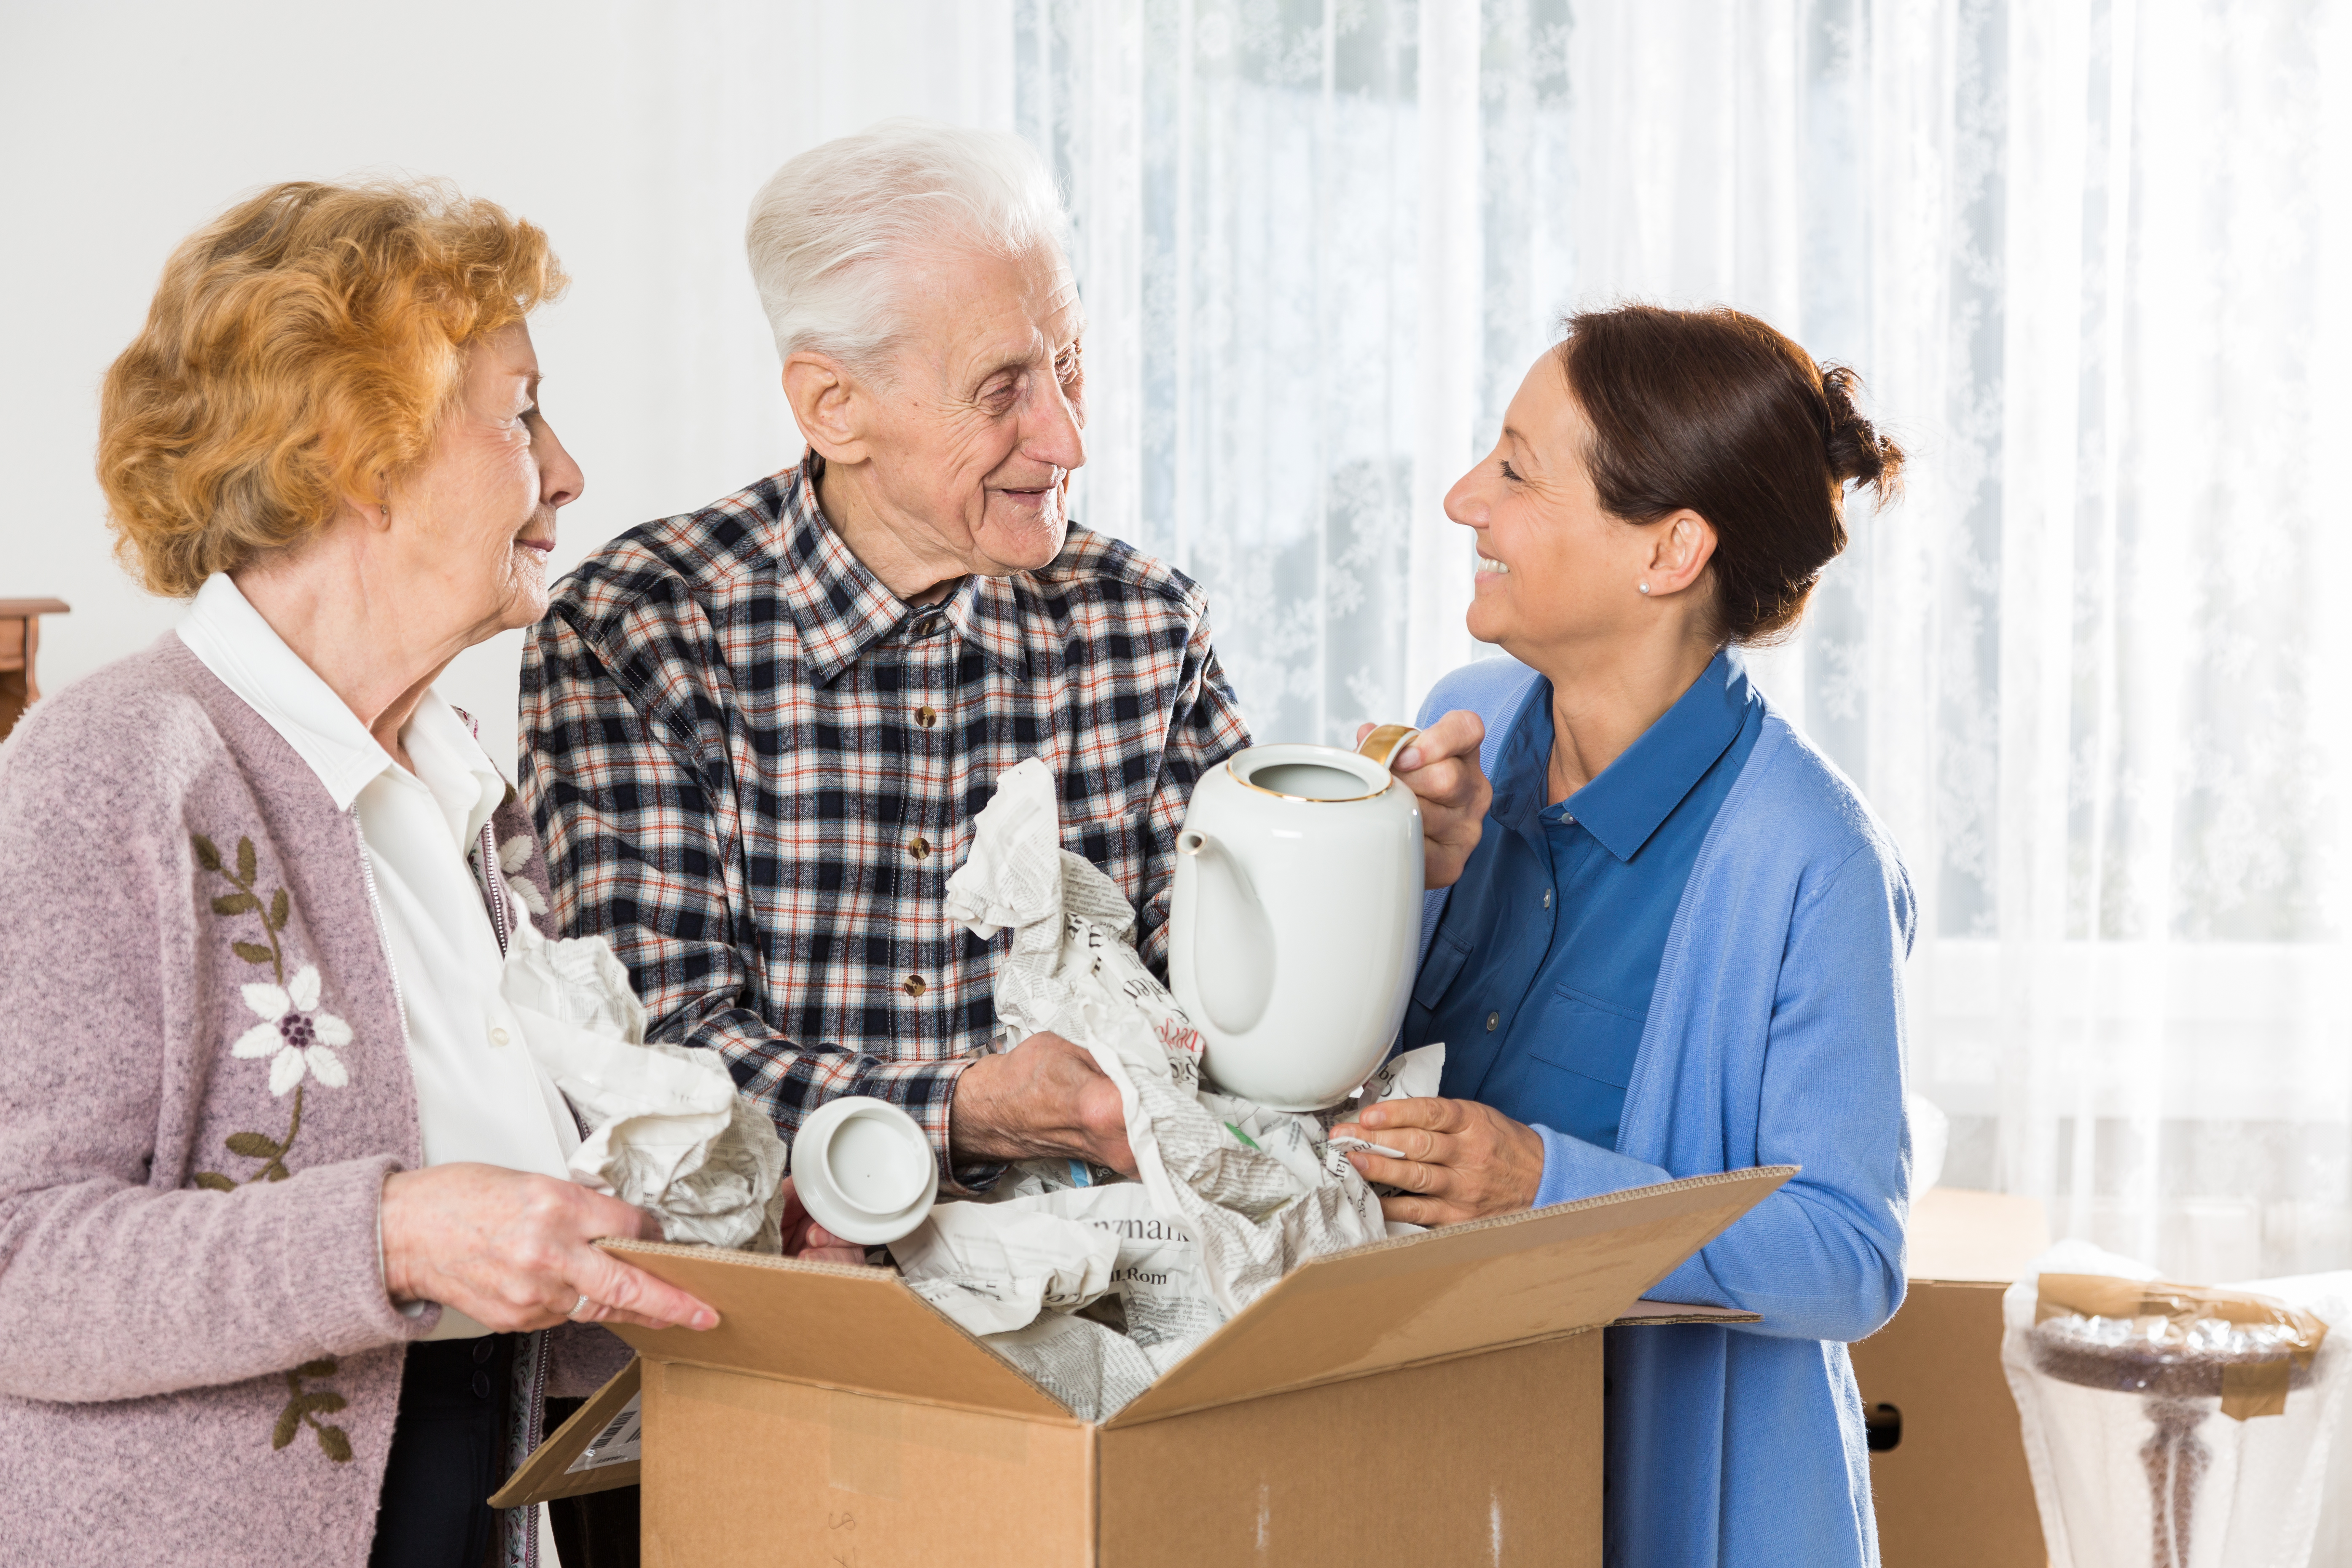 5 Tips for Helping Your Parents Downsize the Family Home